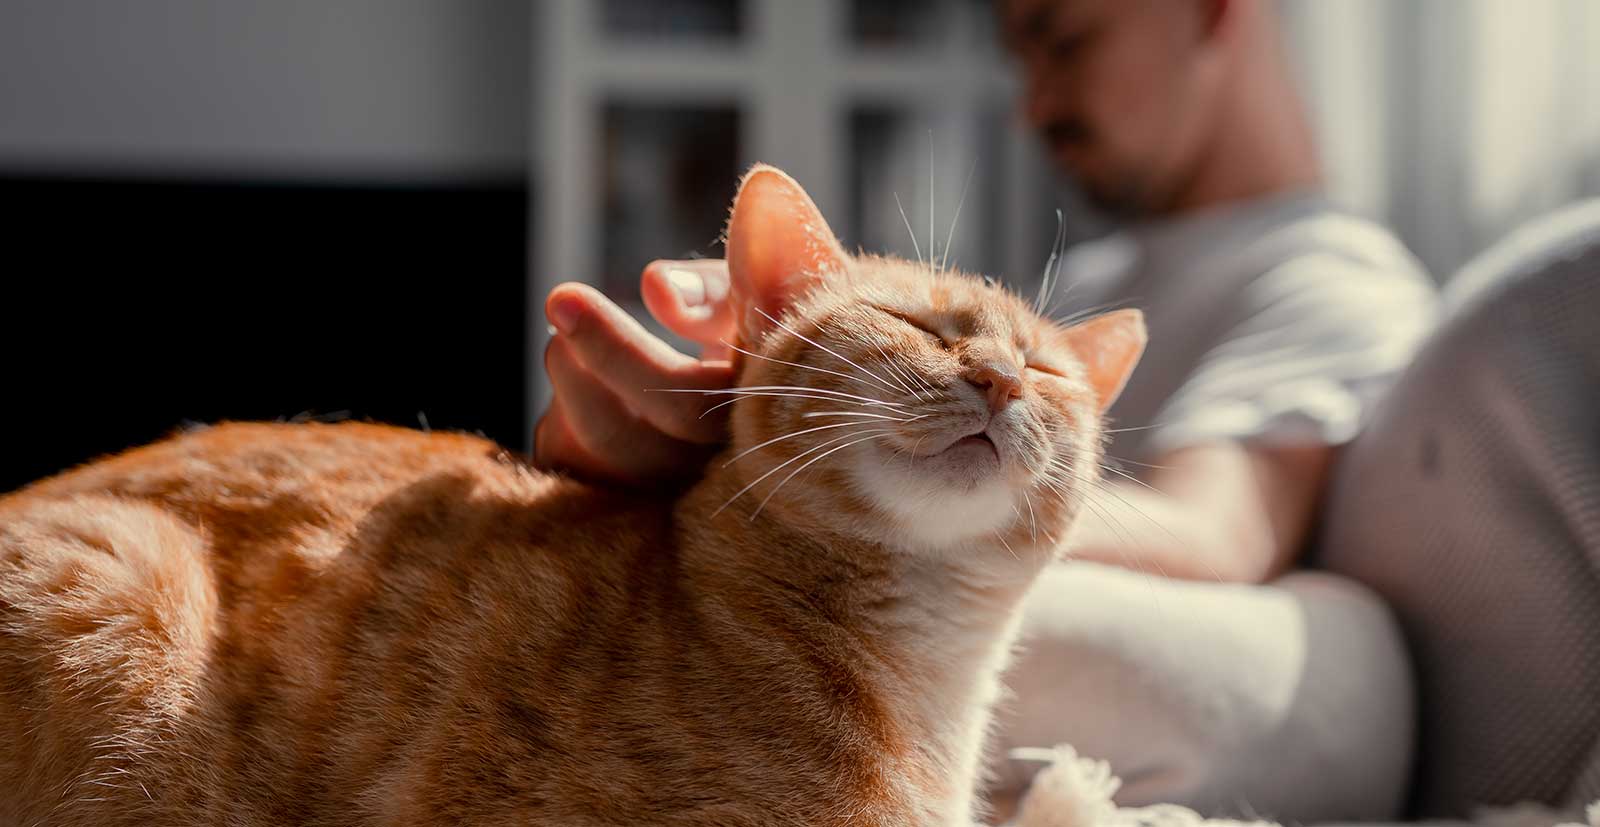 A ginger cat being petted